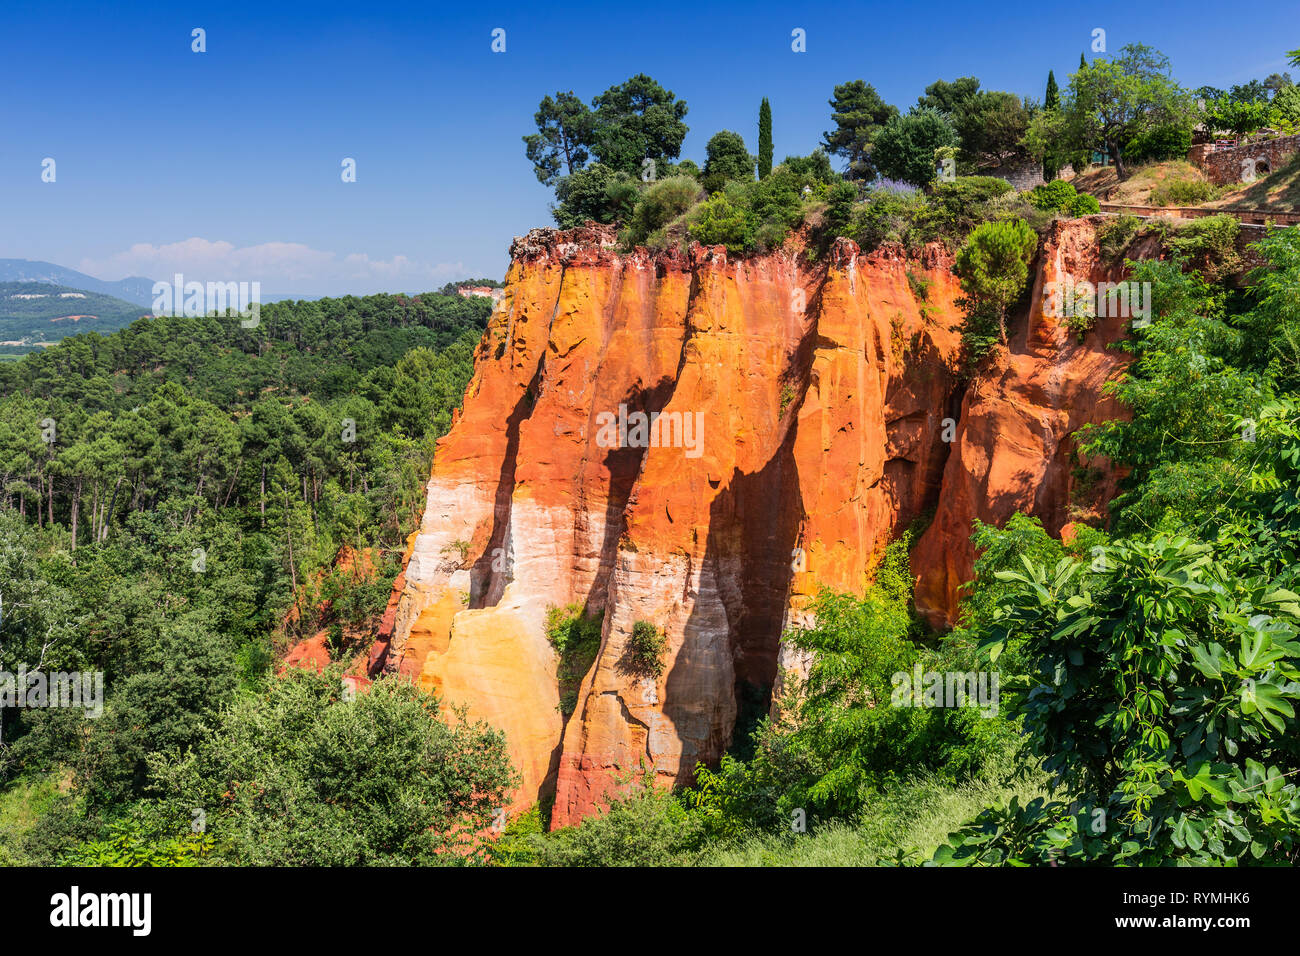 Beautiful red ocher cliffs near the village of Roussillon, France. Stock Photo